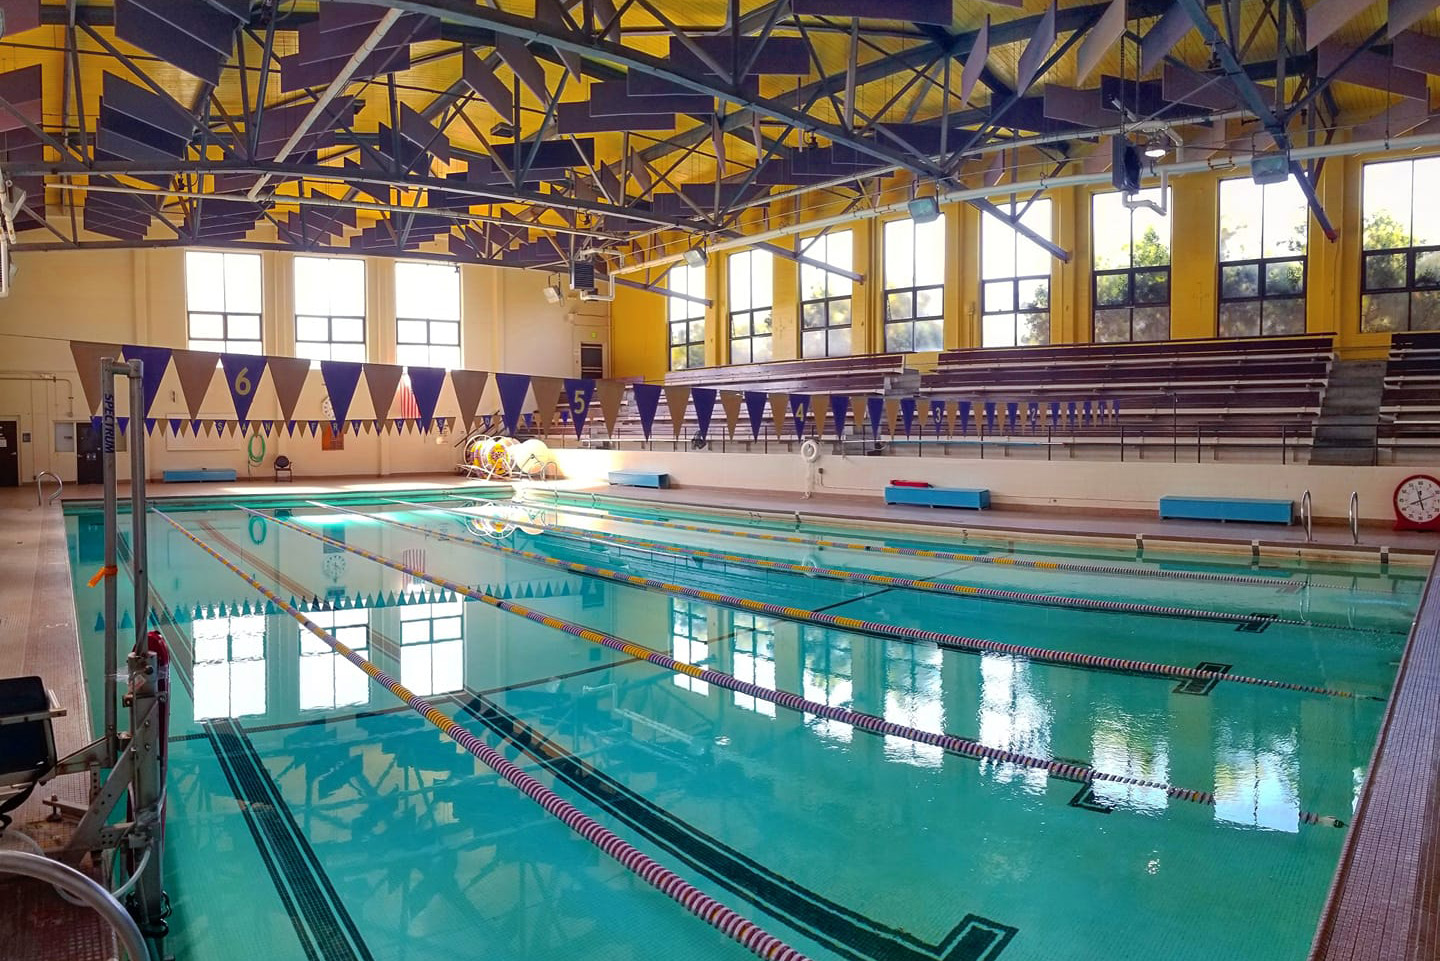 Swimming pool at the Gymnasium building